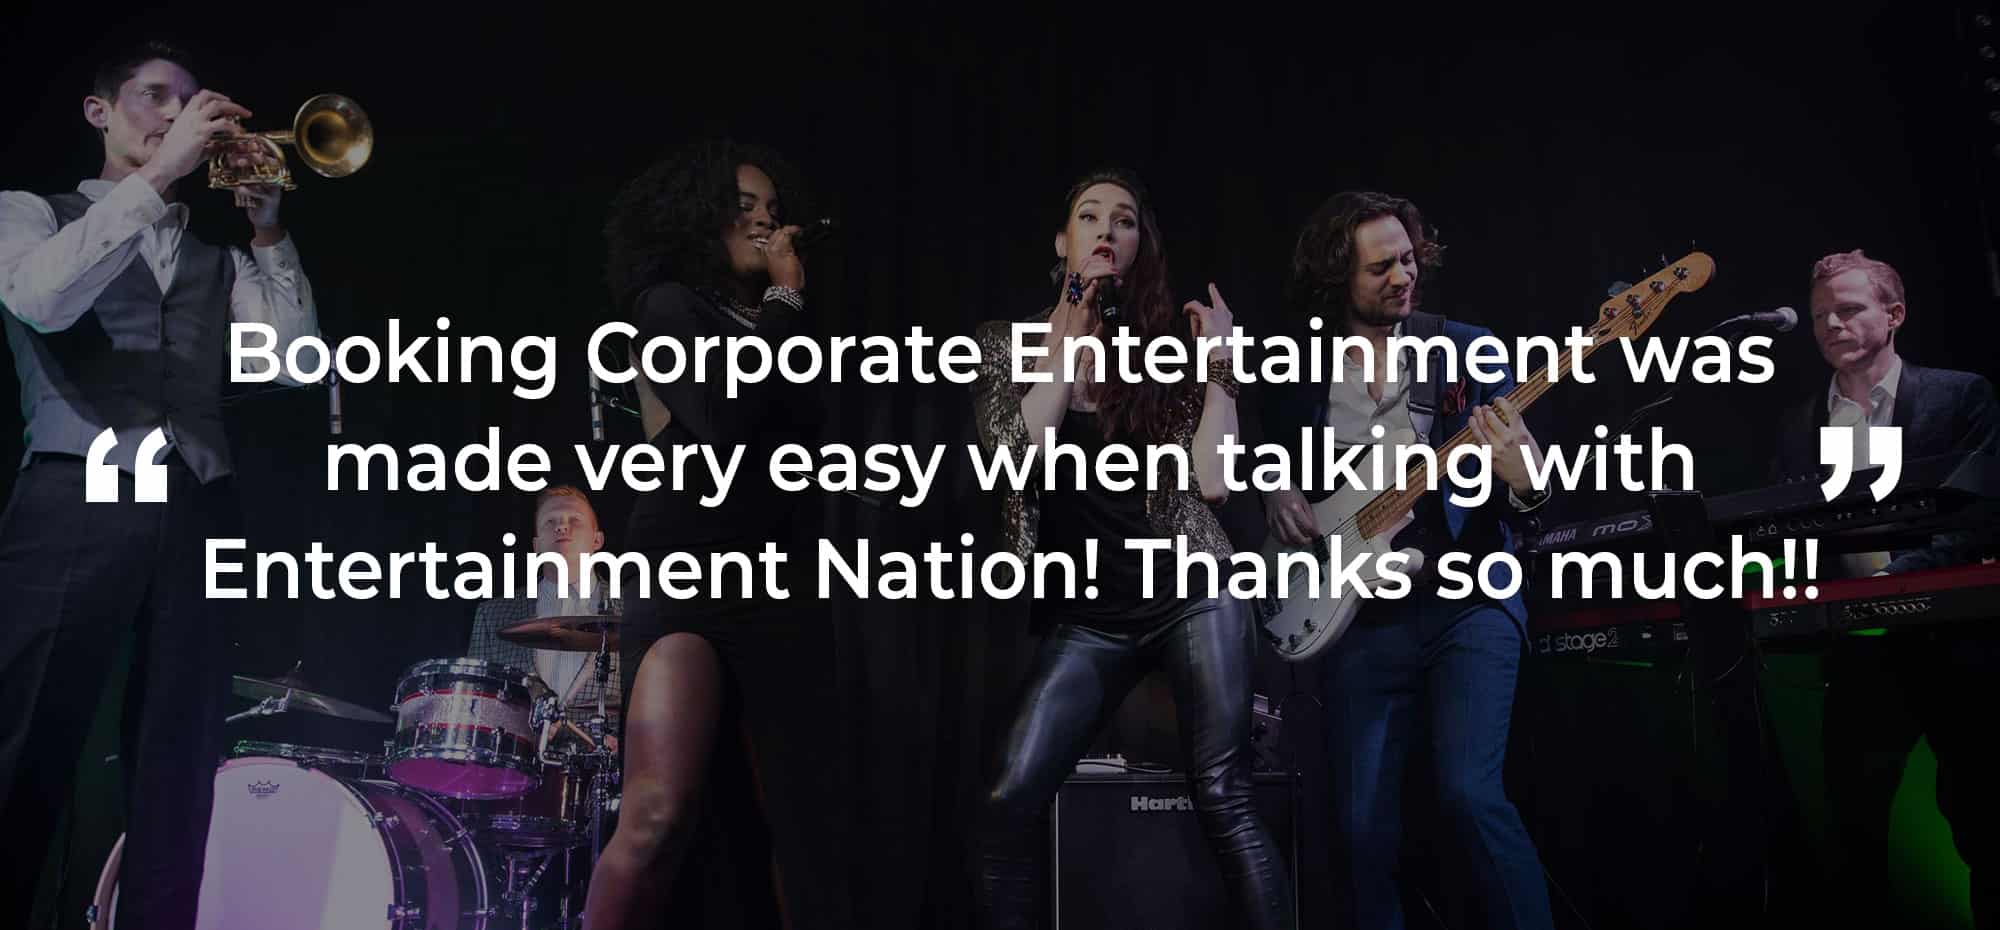 Client Review of Corporate Entertainment South Yorkshire